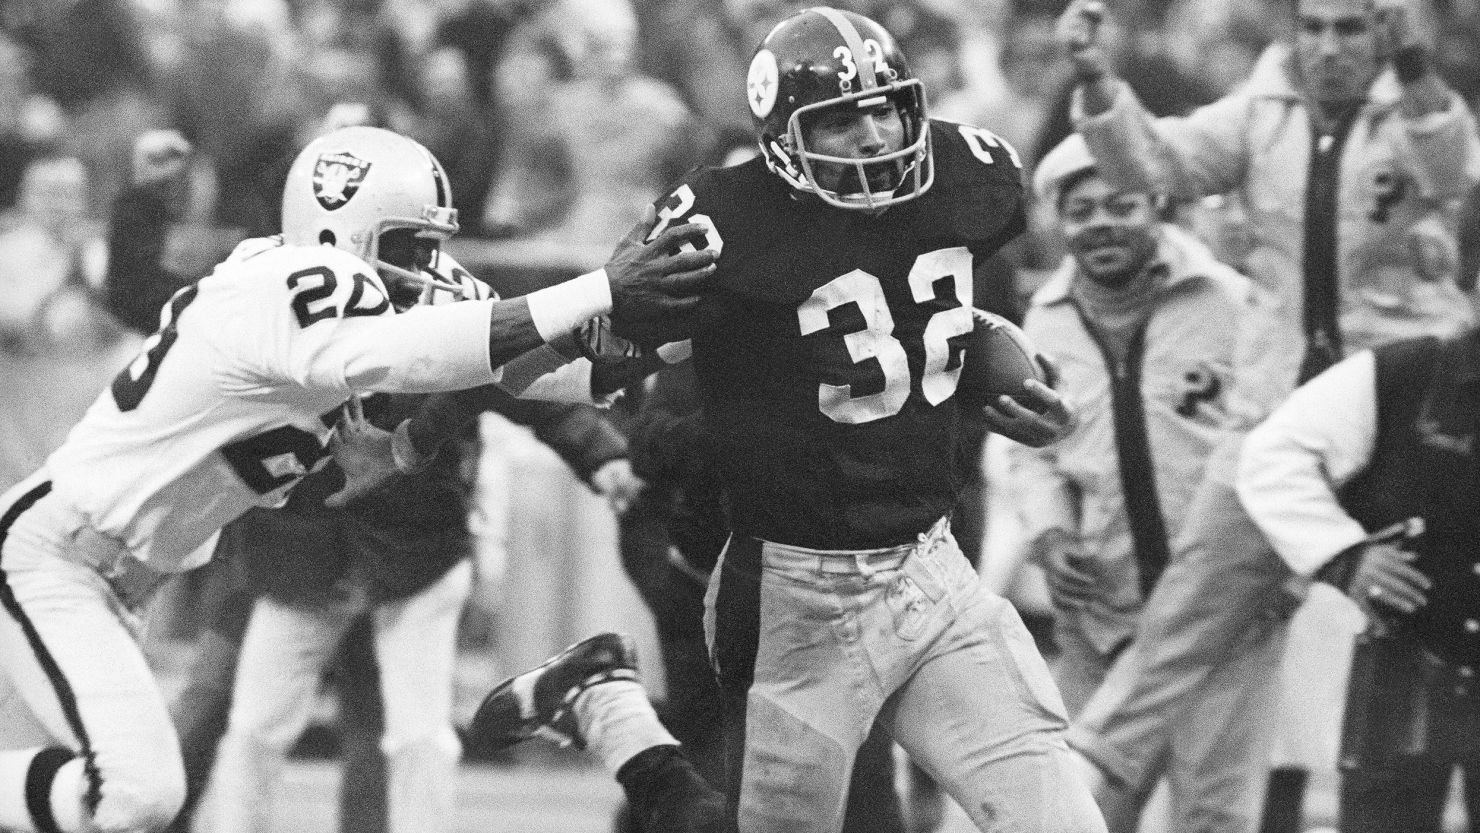 Steelers running back Franco Harris made the catch known as the Immaculate Reception 50 years ago, on December 23, 1972.